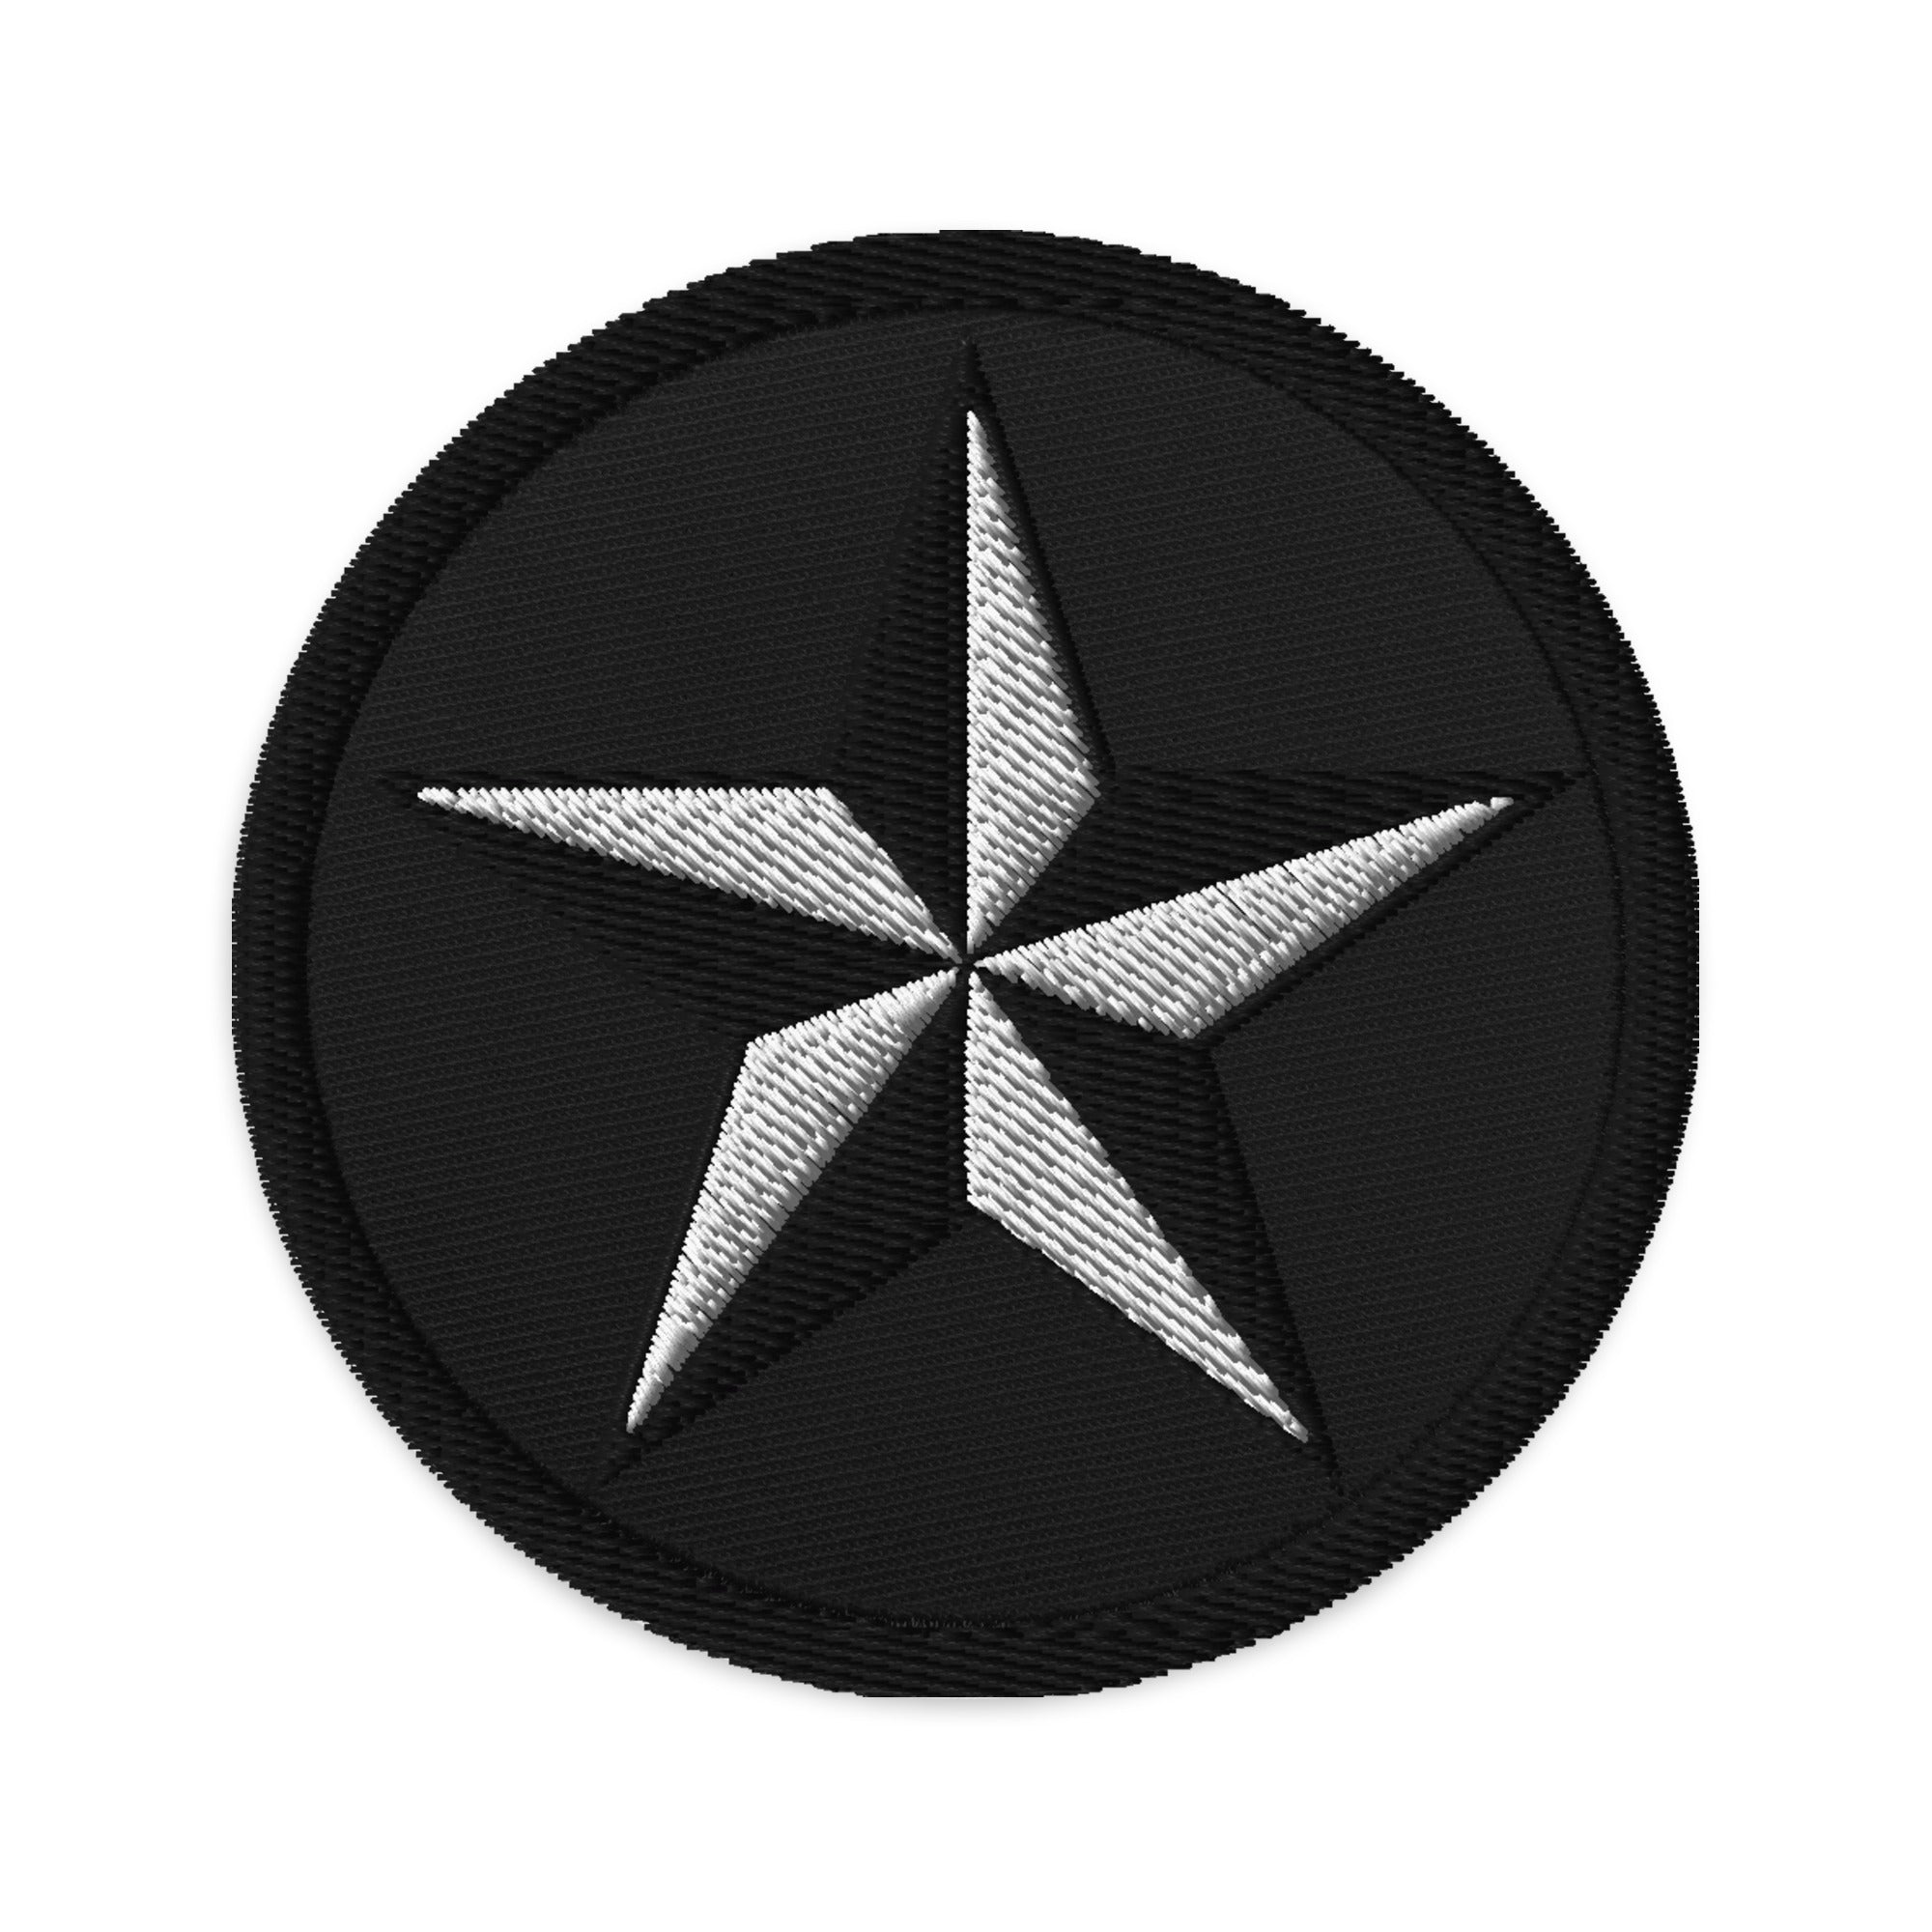 Nautical Star North Star Embroidered Patch White / Black Thread - Edge of Life Designs